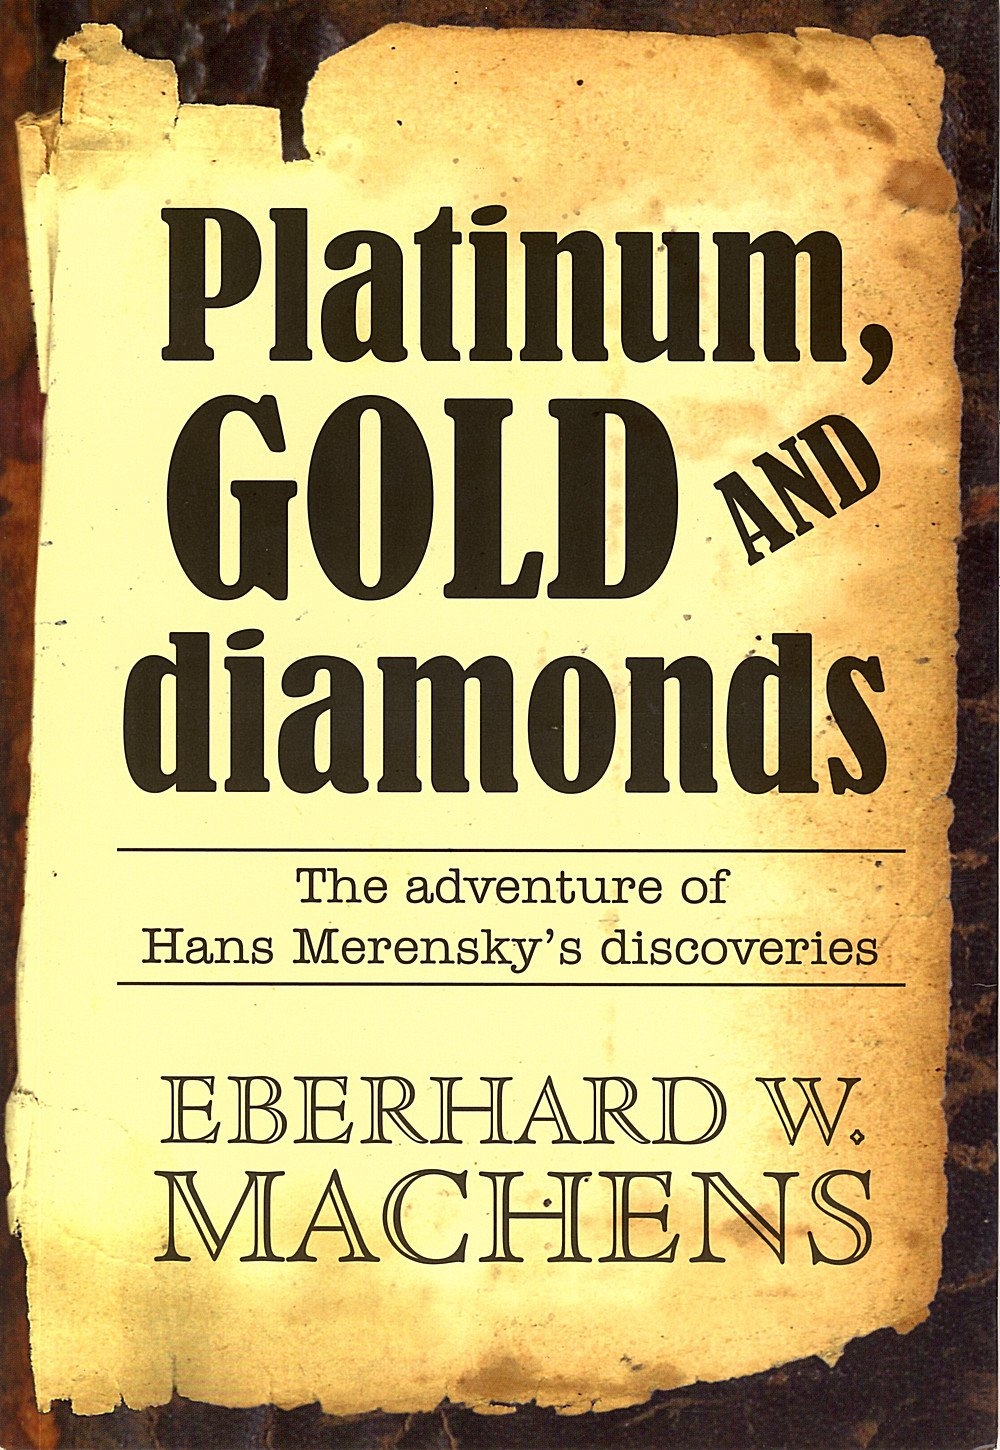 Platinum, Gold and Diamonds. The story of Hans Merensky’s discovery